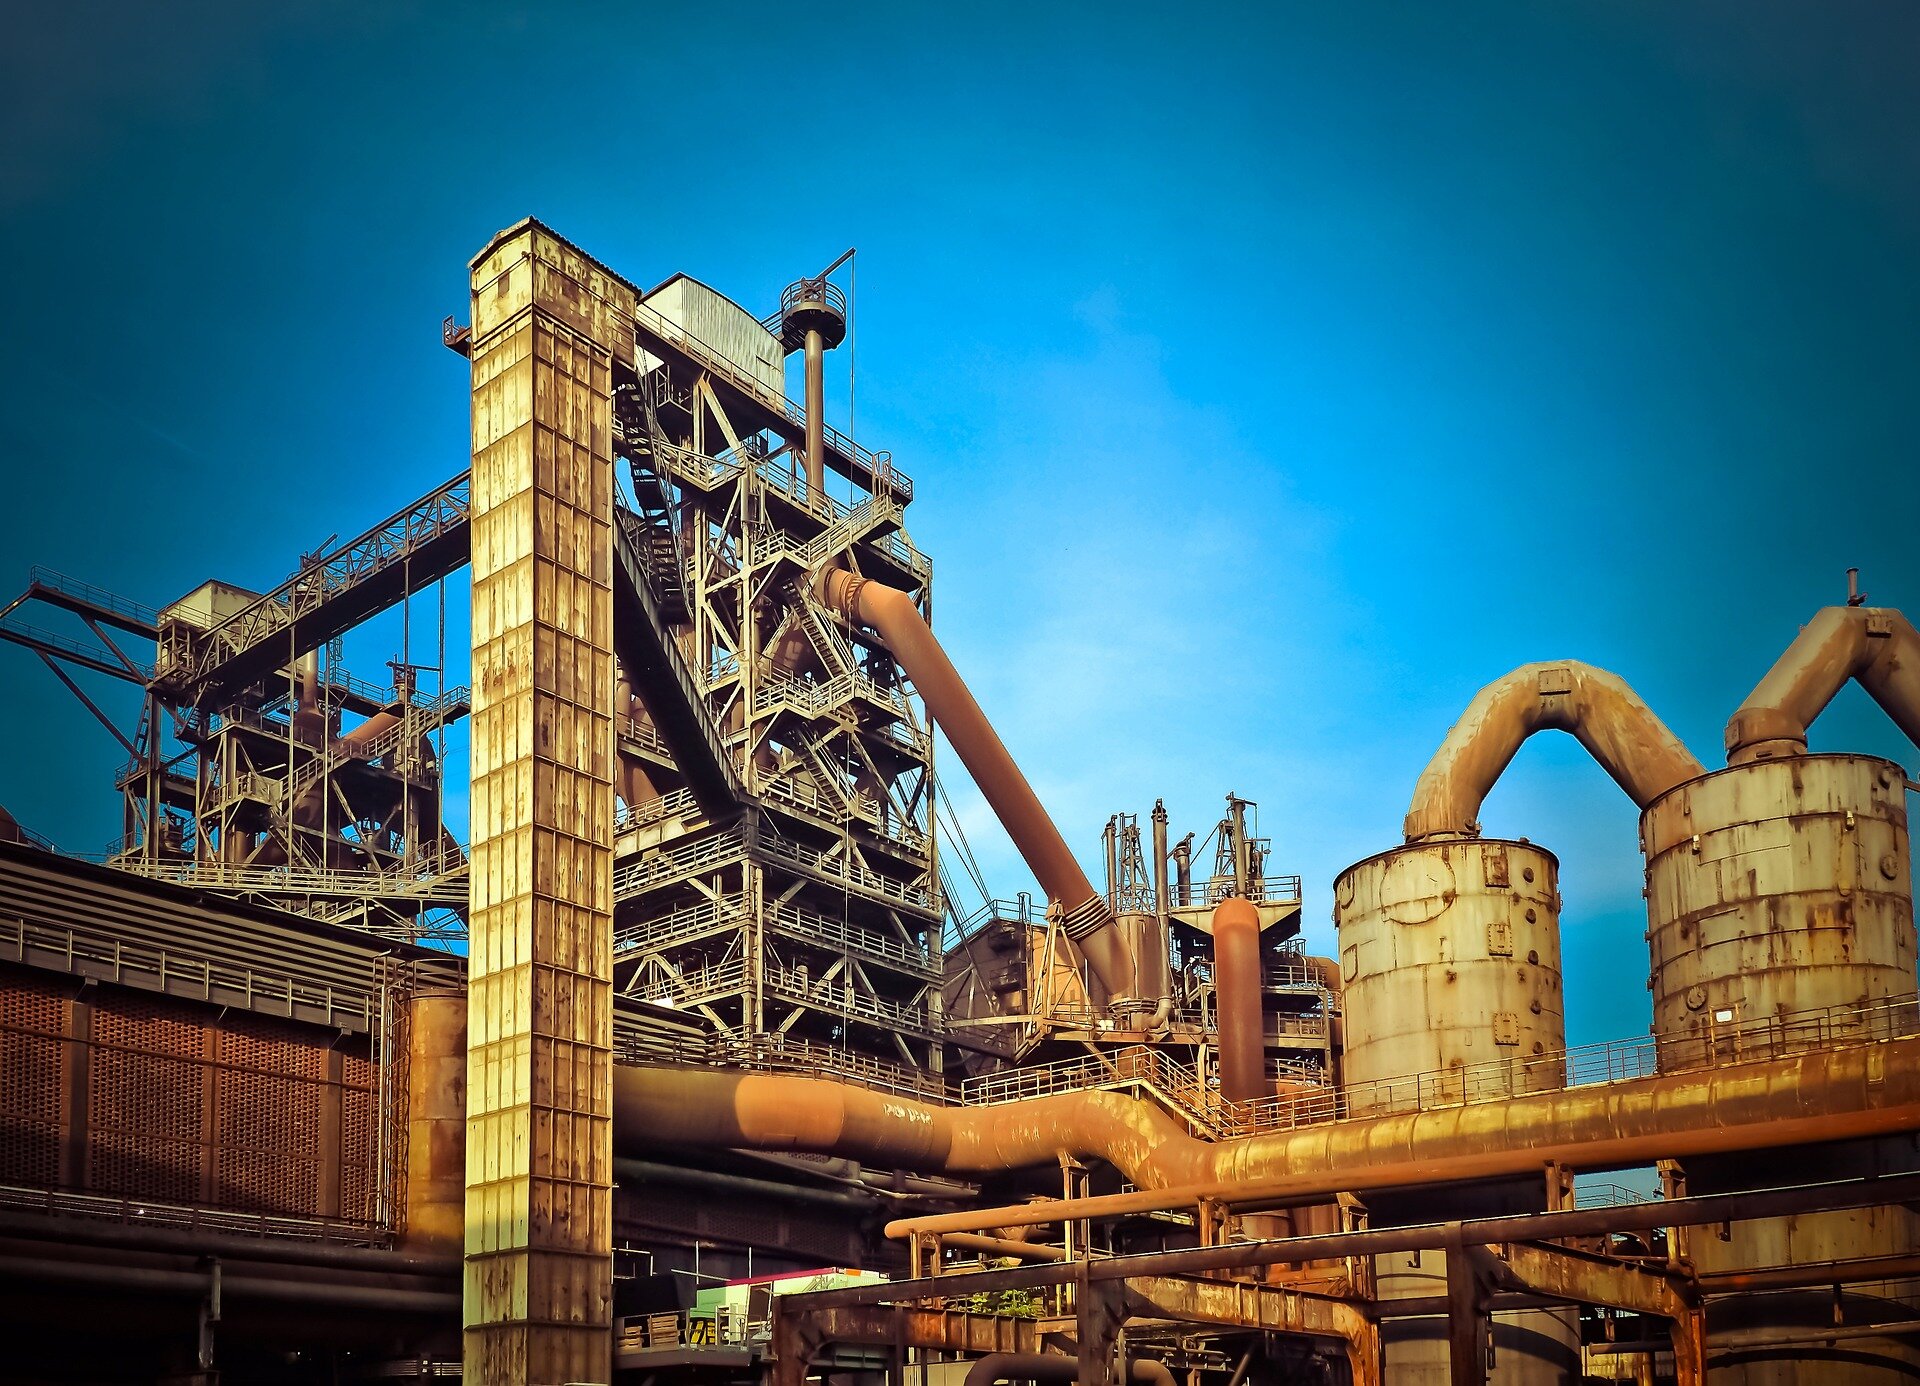 Novel adaptation for existing blast furnaces could reduce steelmaking emissions by 90%